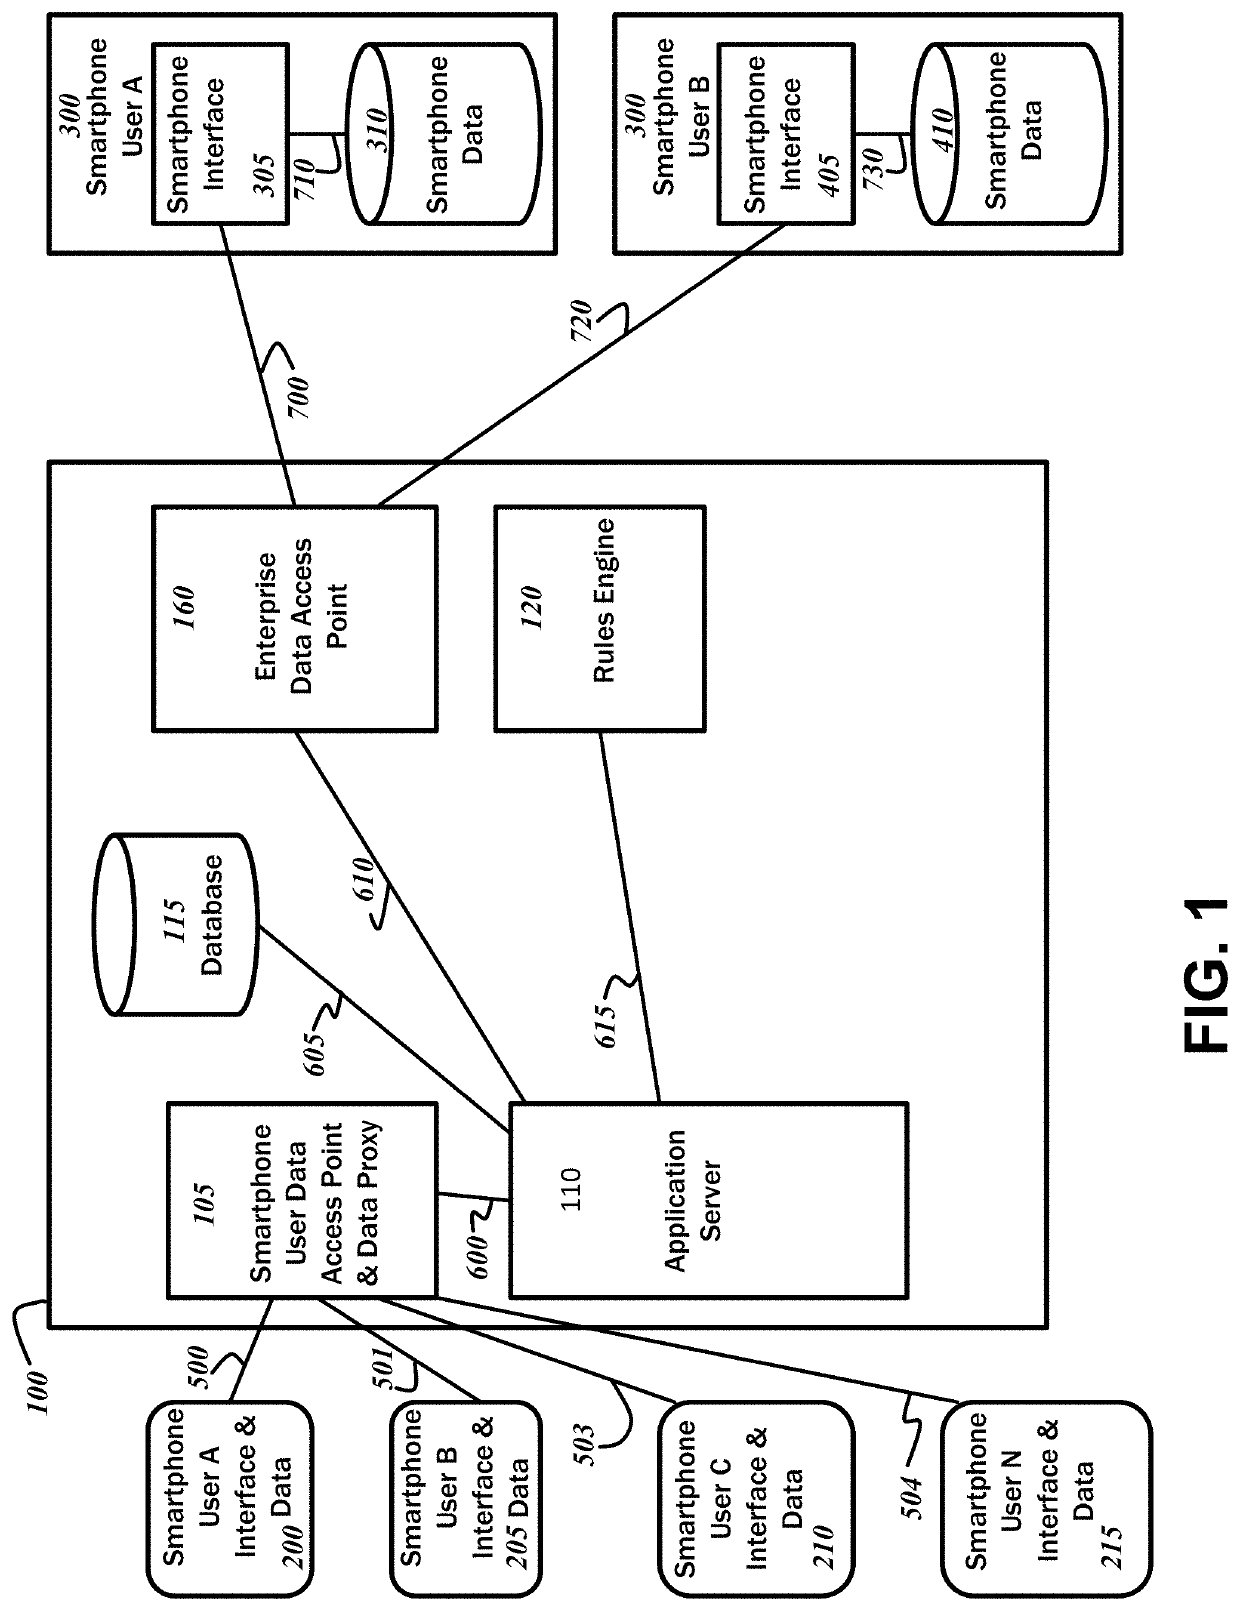 Enhanced data sharing to and between mobile device users